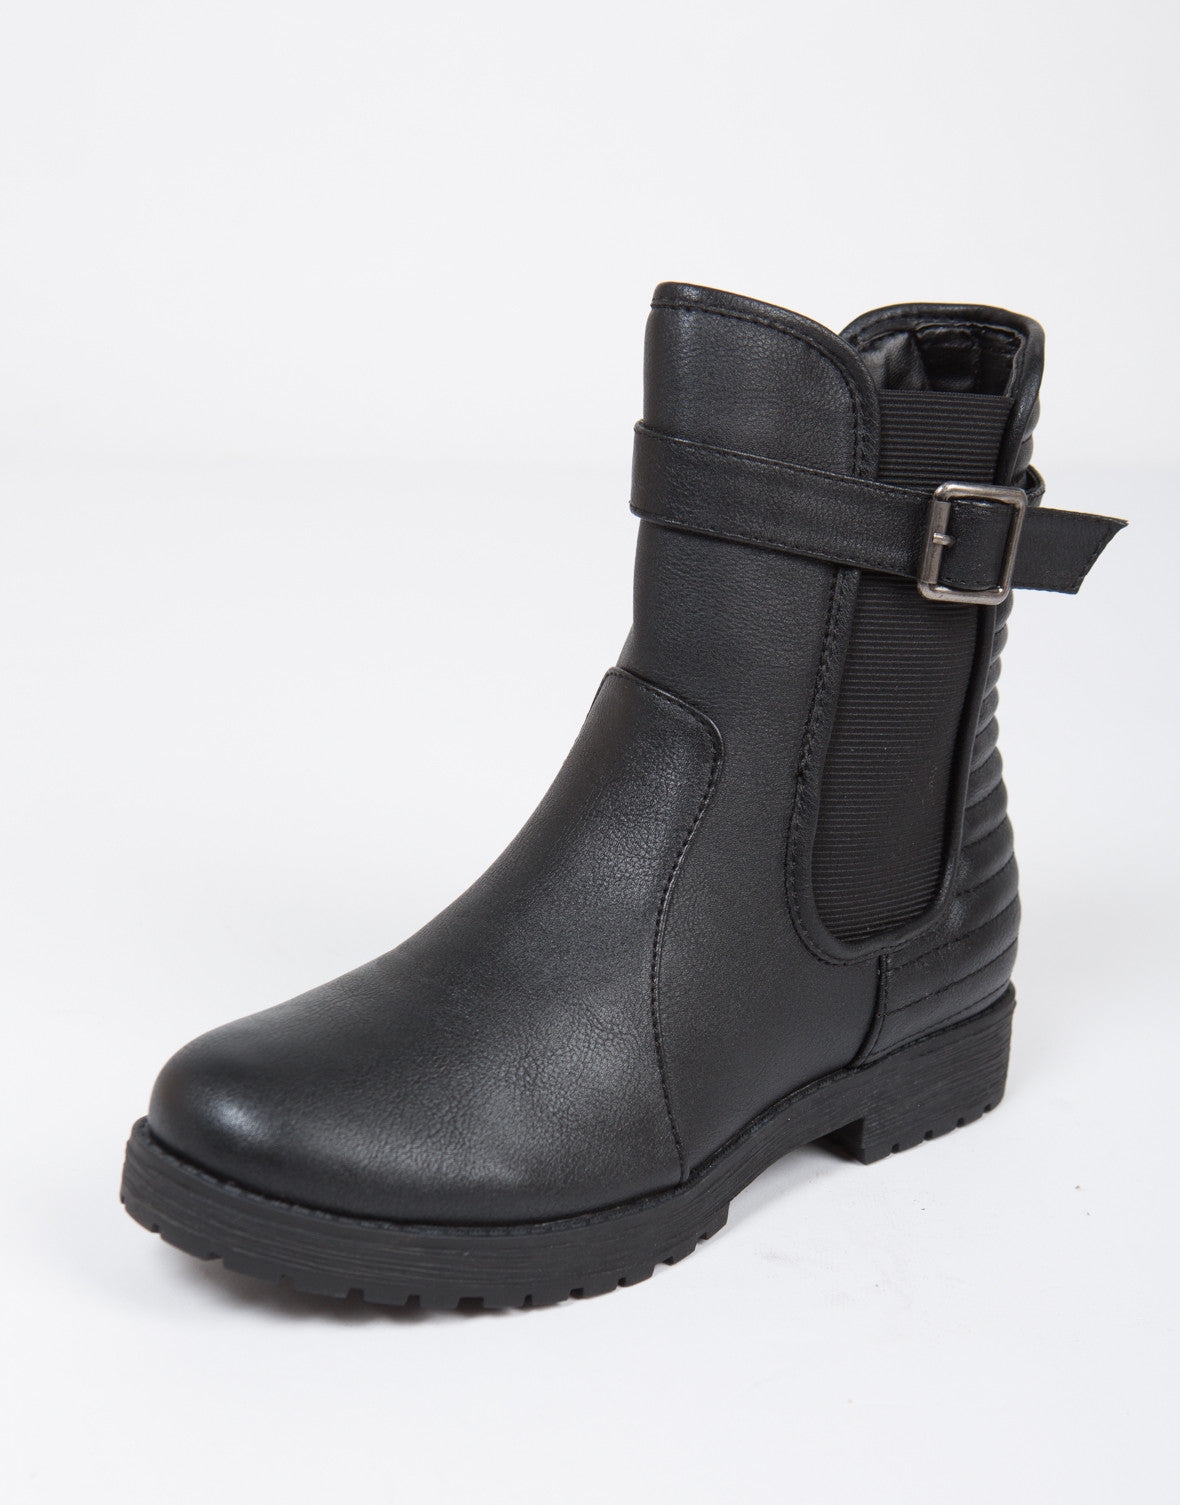 Moto Ridged Ankle Boots Black Boots Leather Boots